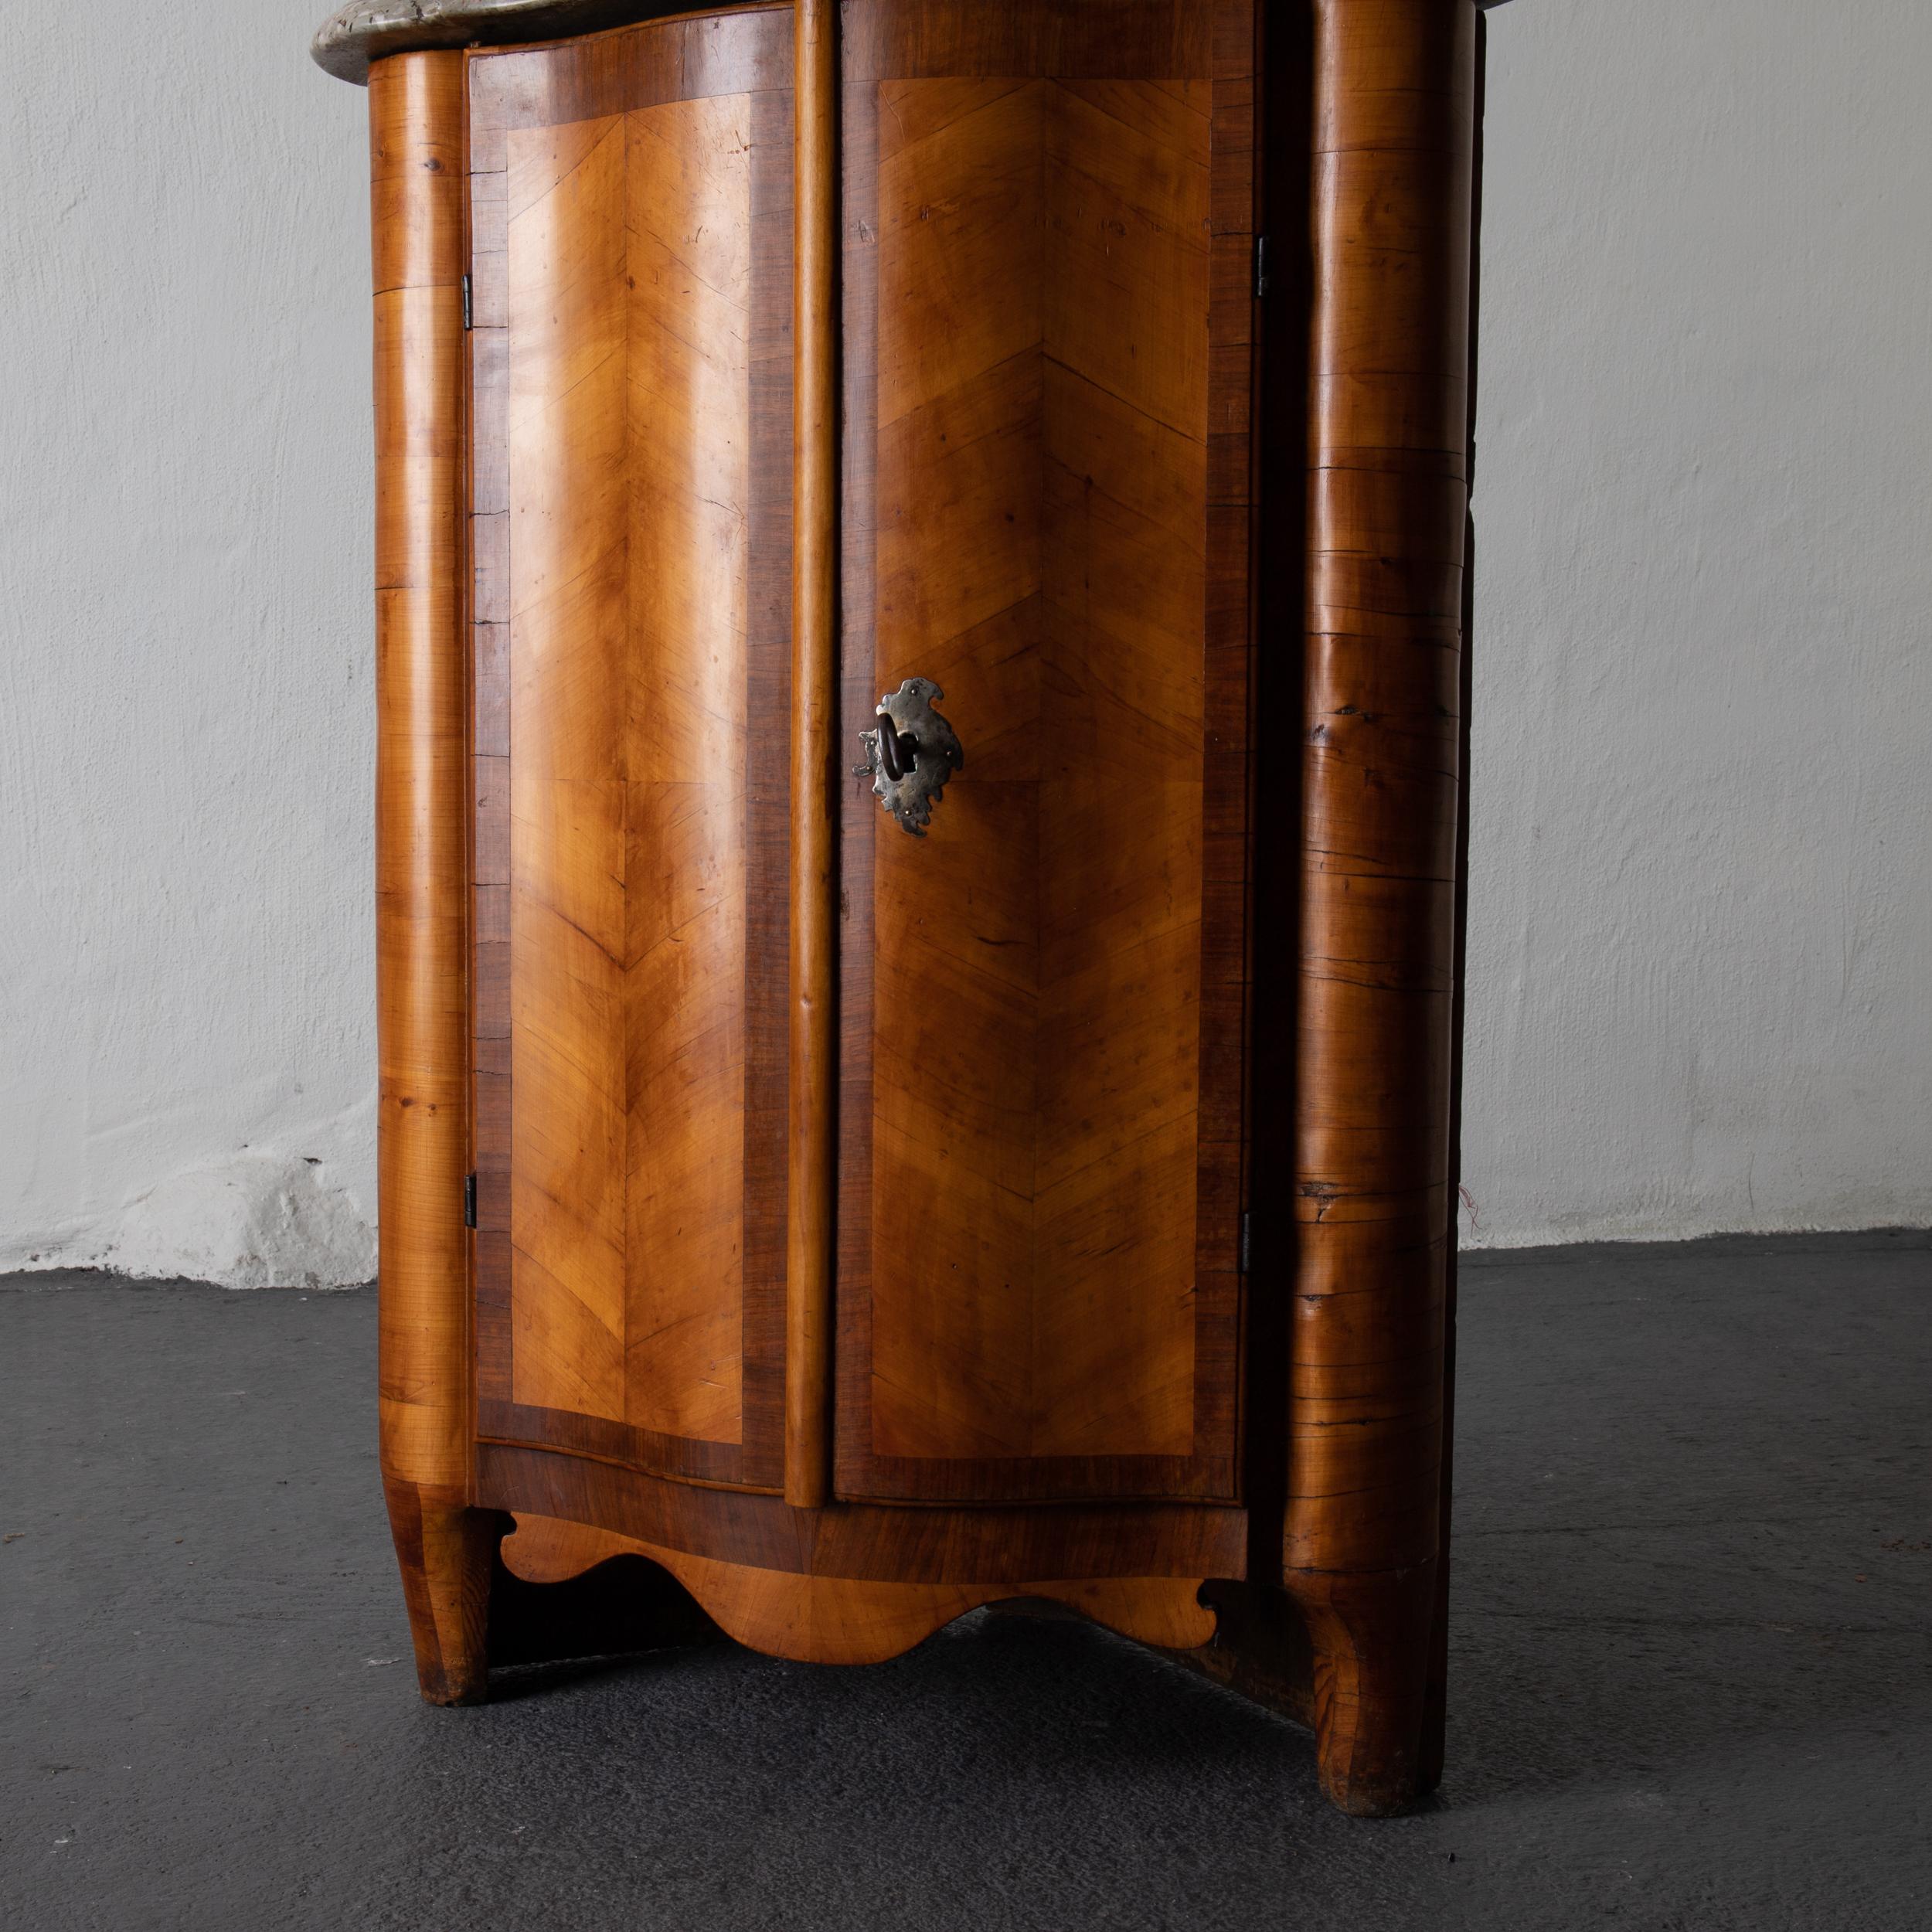 Cabinet corner Swedish stone top brown Sweden. A low corner cabinet made during the Rococo period 1750-1775 in northern Europe. Veneered in fruit wood and mahogany. Interior with shelves. Lock and Key exists.